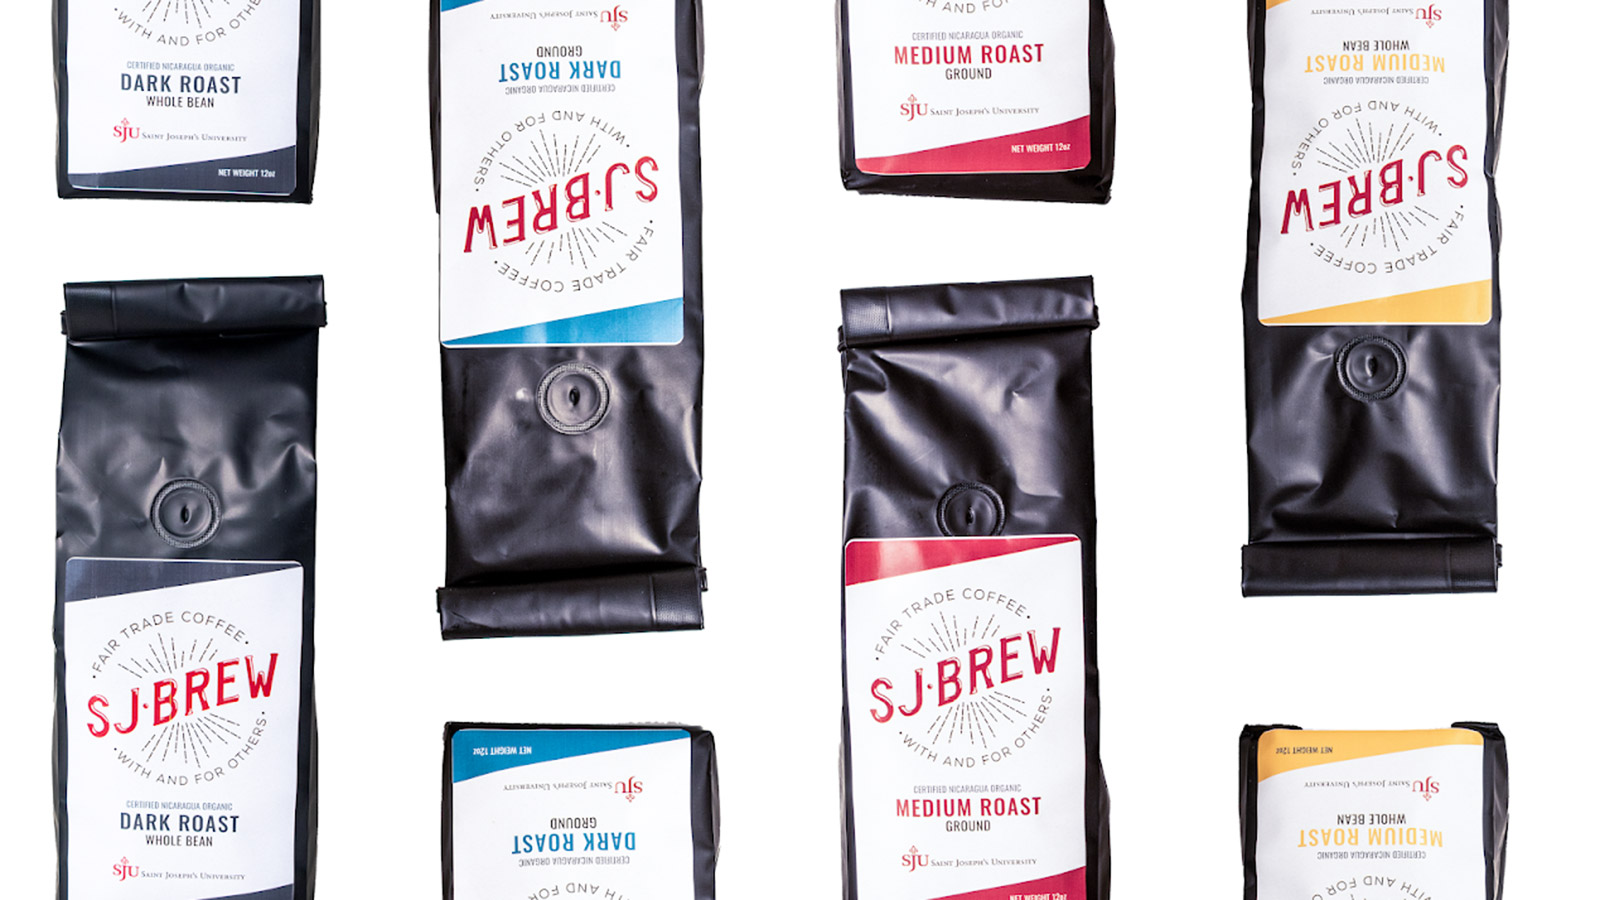 bags of sj brew's coffee beans